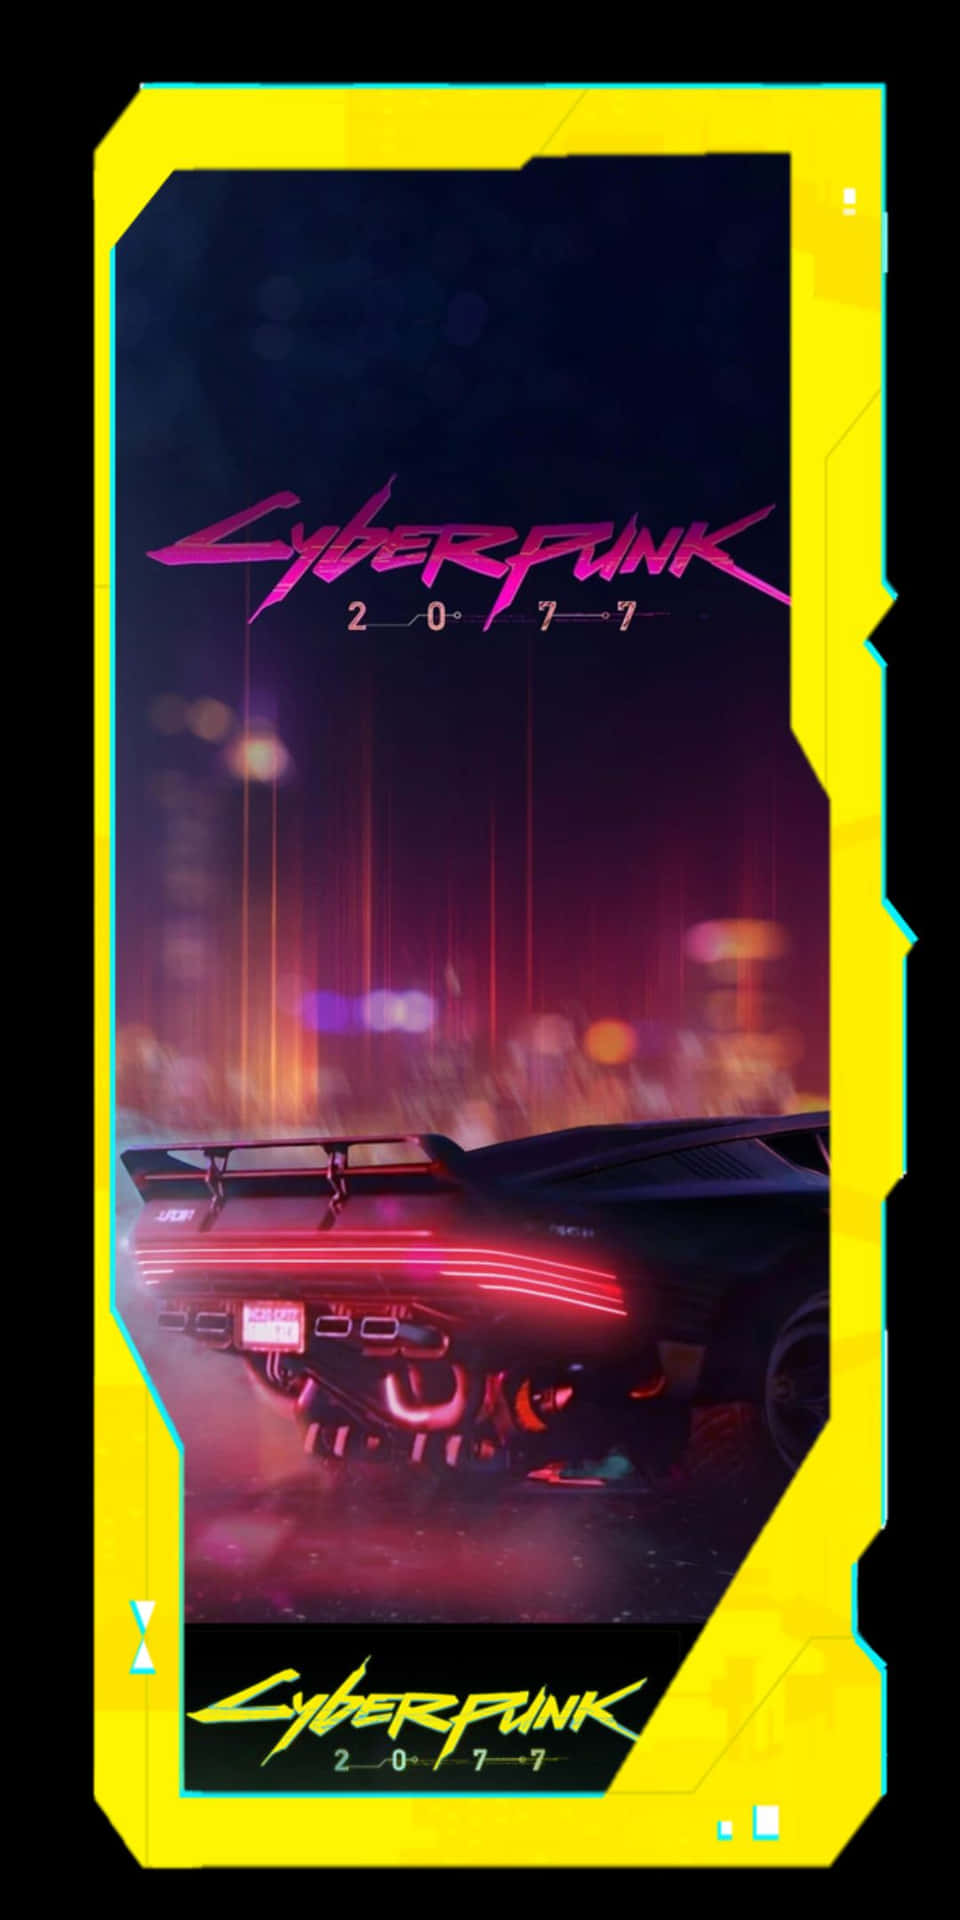 Cyberpunk 2077 on Pixel 3, the hottest gaming phone